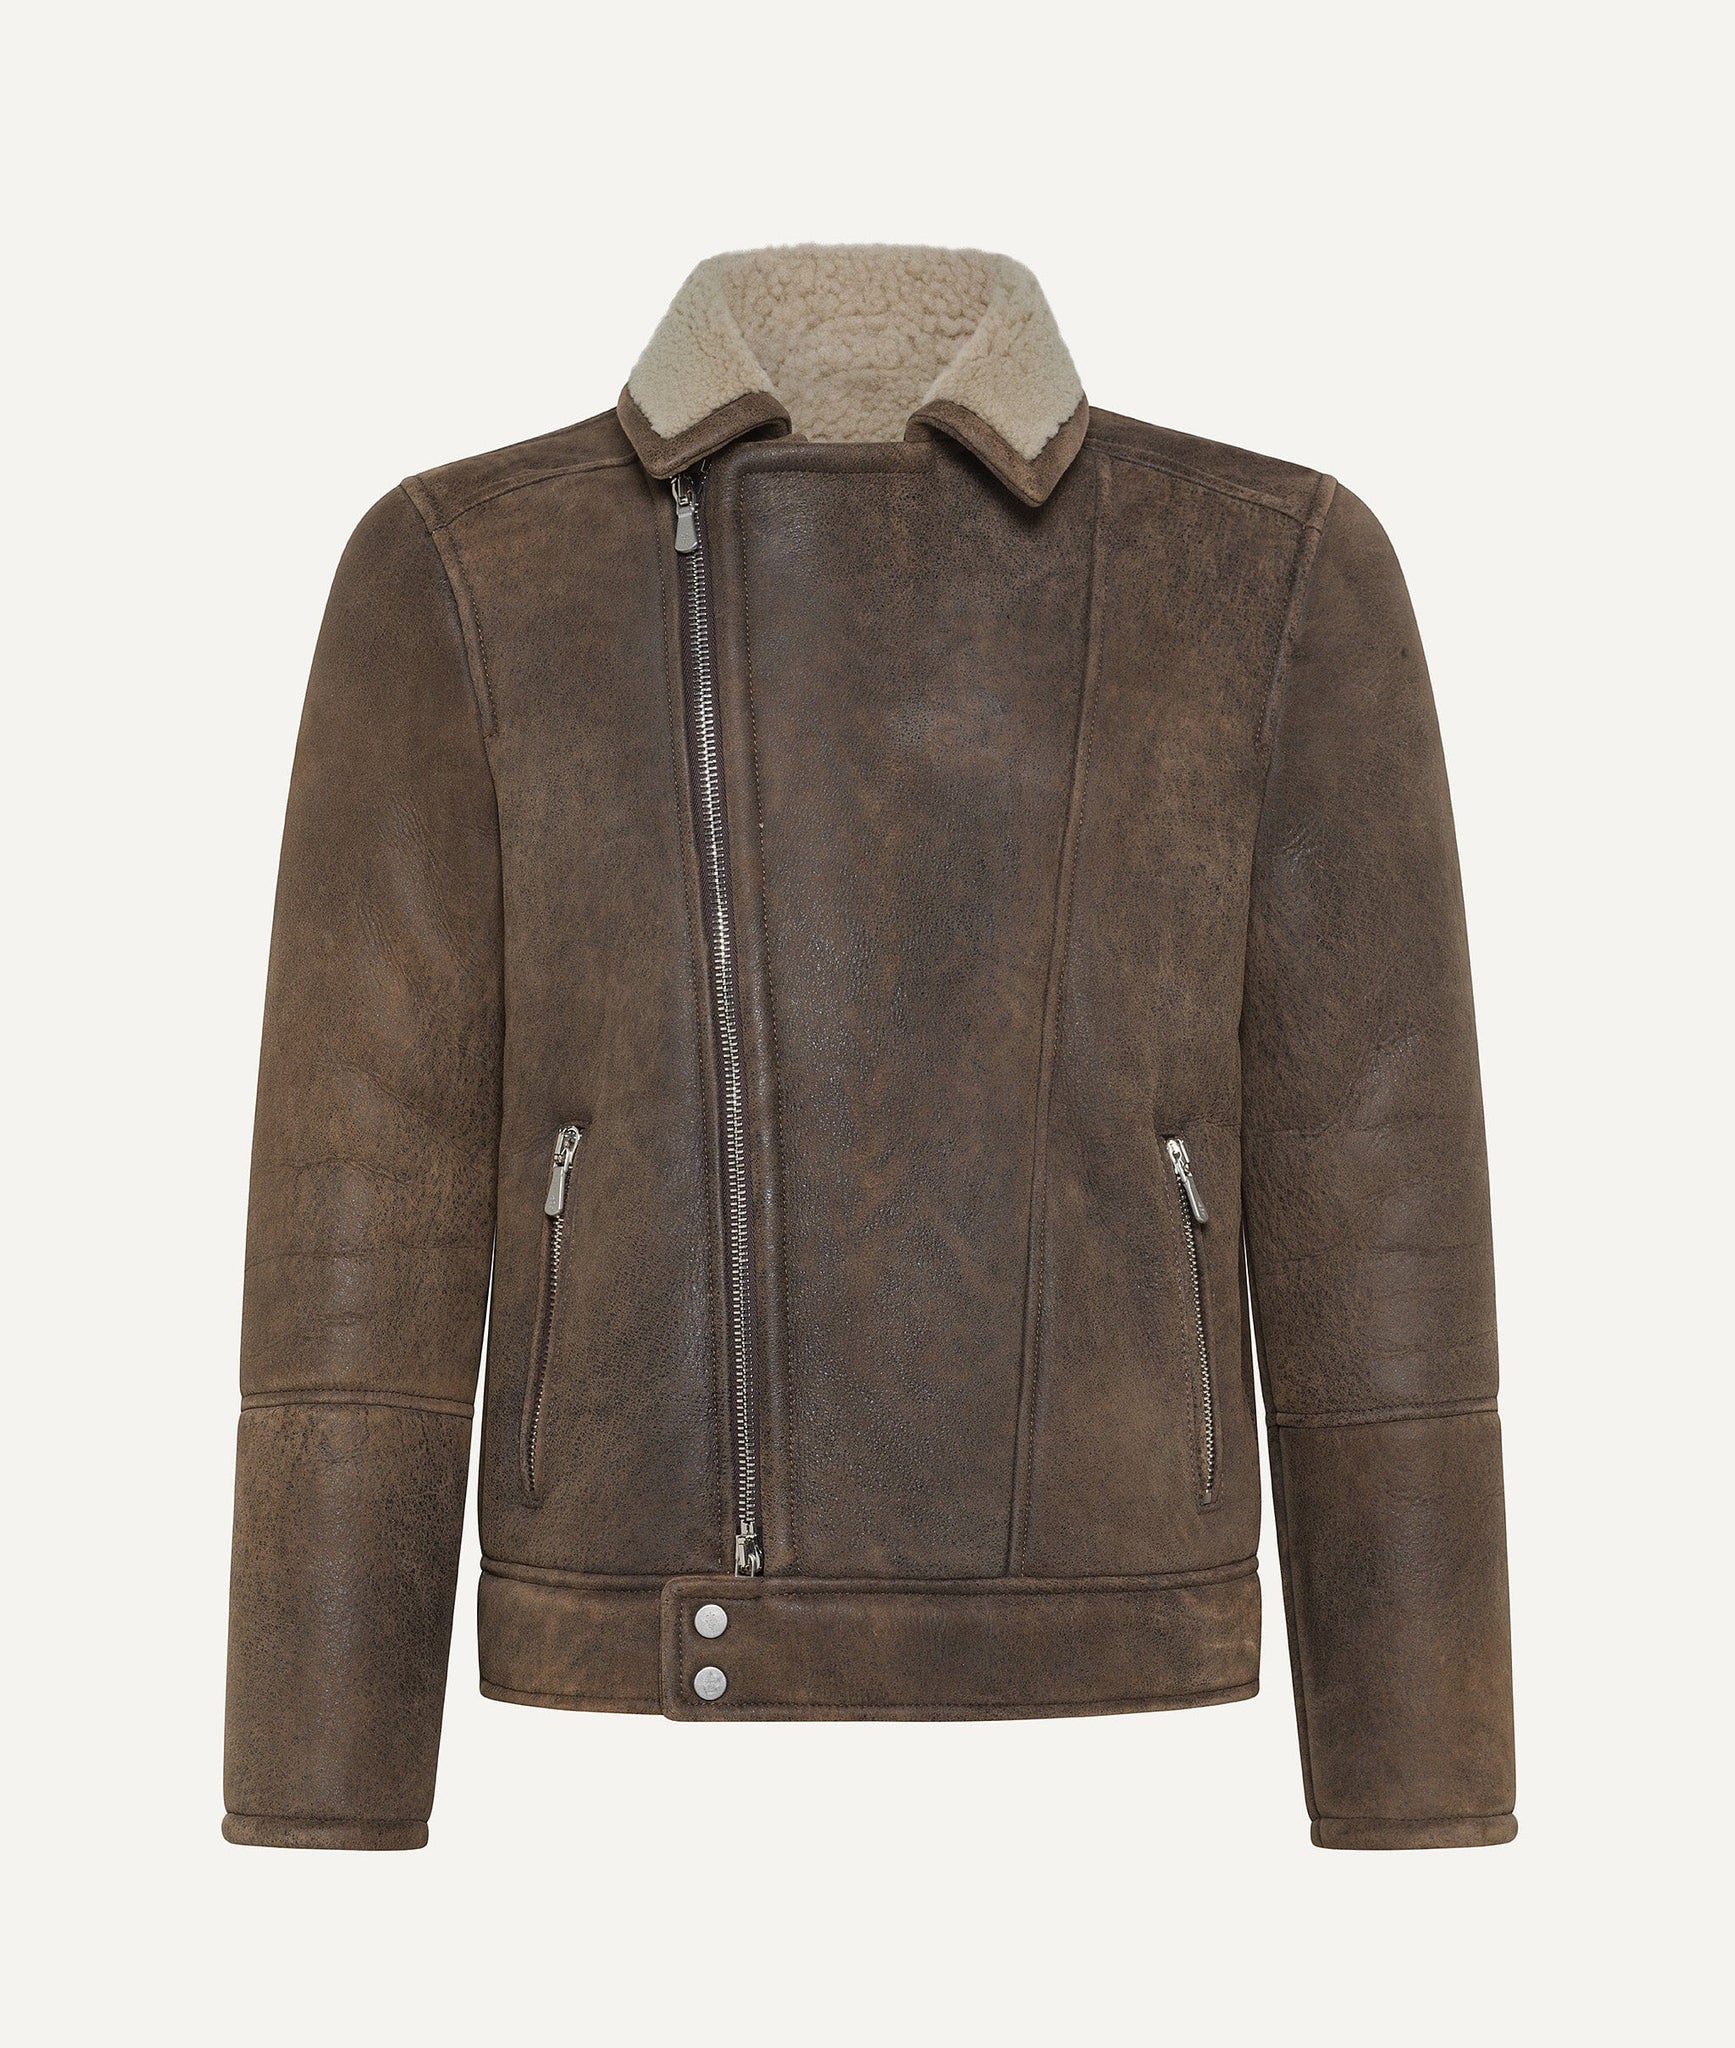 Eleventy - Leather Jacket with Shearling in Lambskin